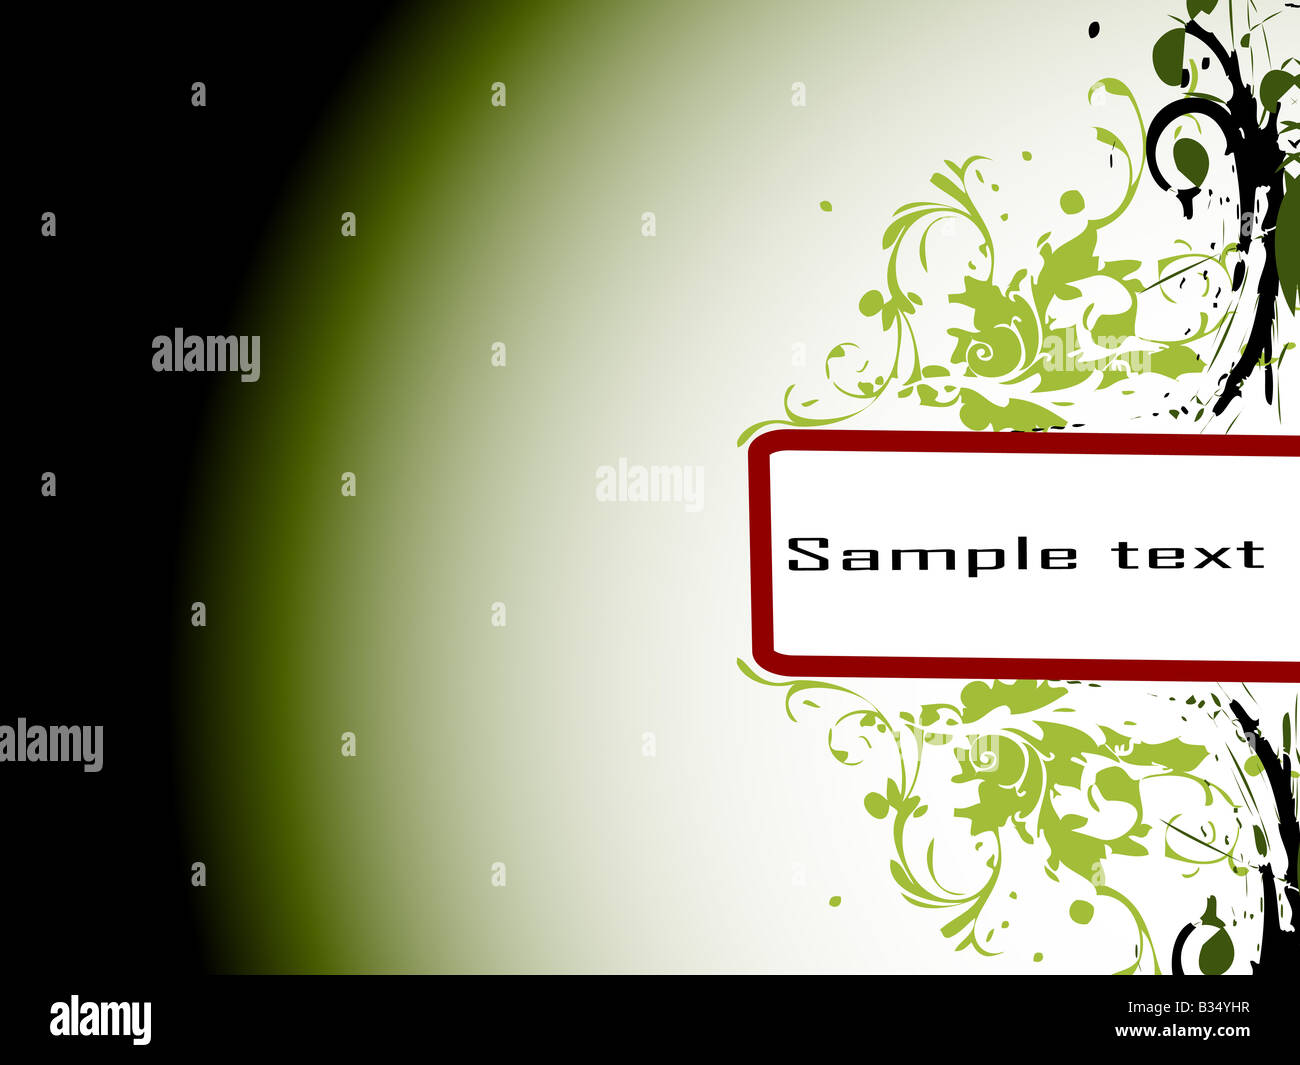 swirly design with grunge and sample text on gardient background Stock Photo